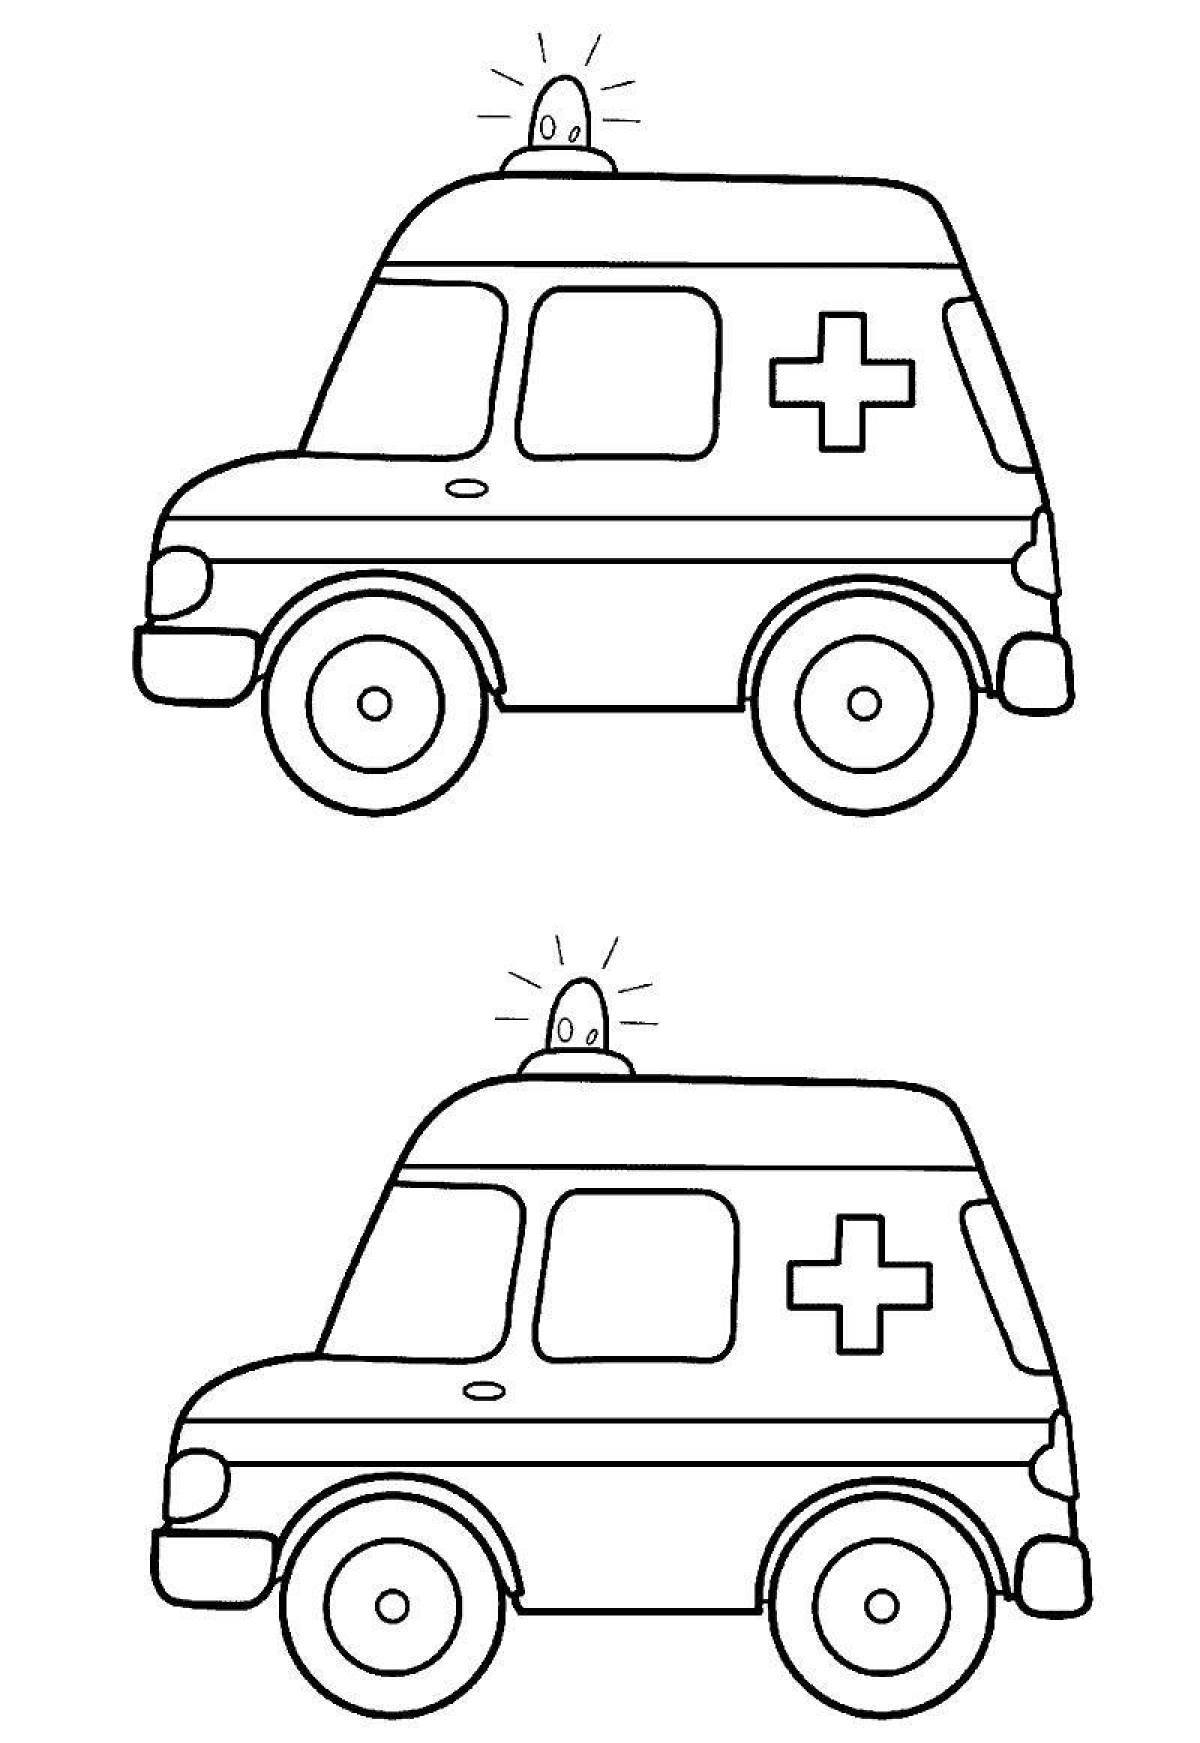 Fabulous ambulance coloring page for kids